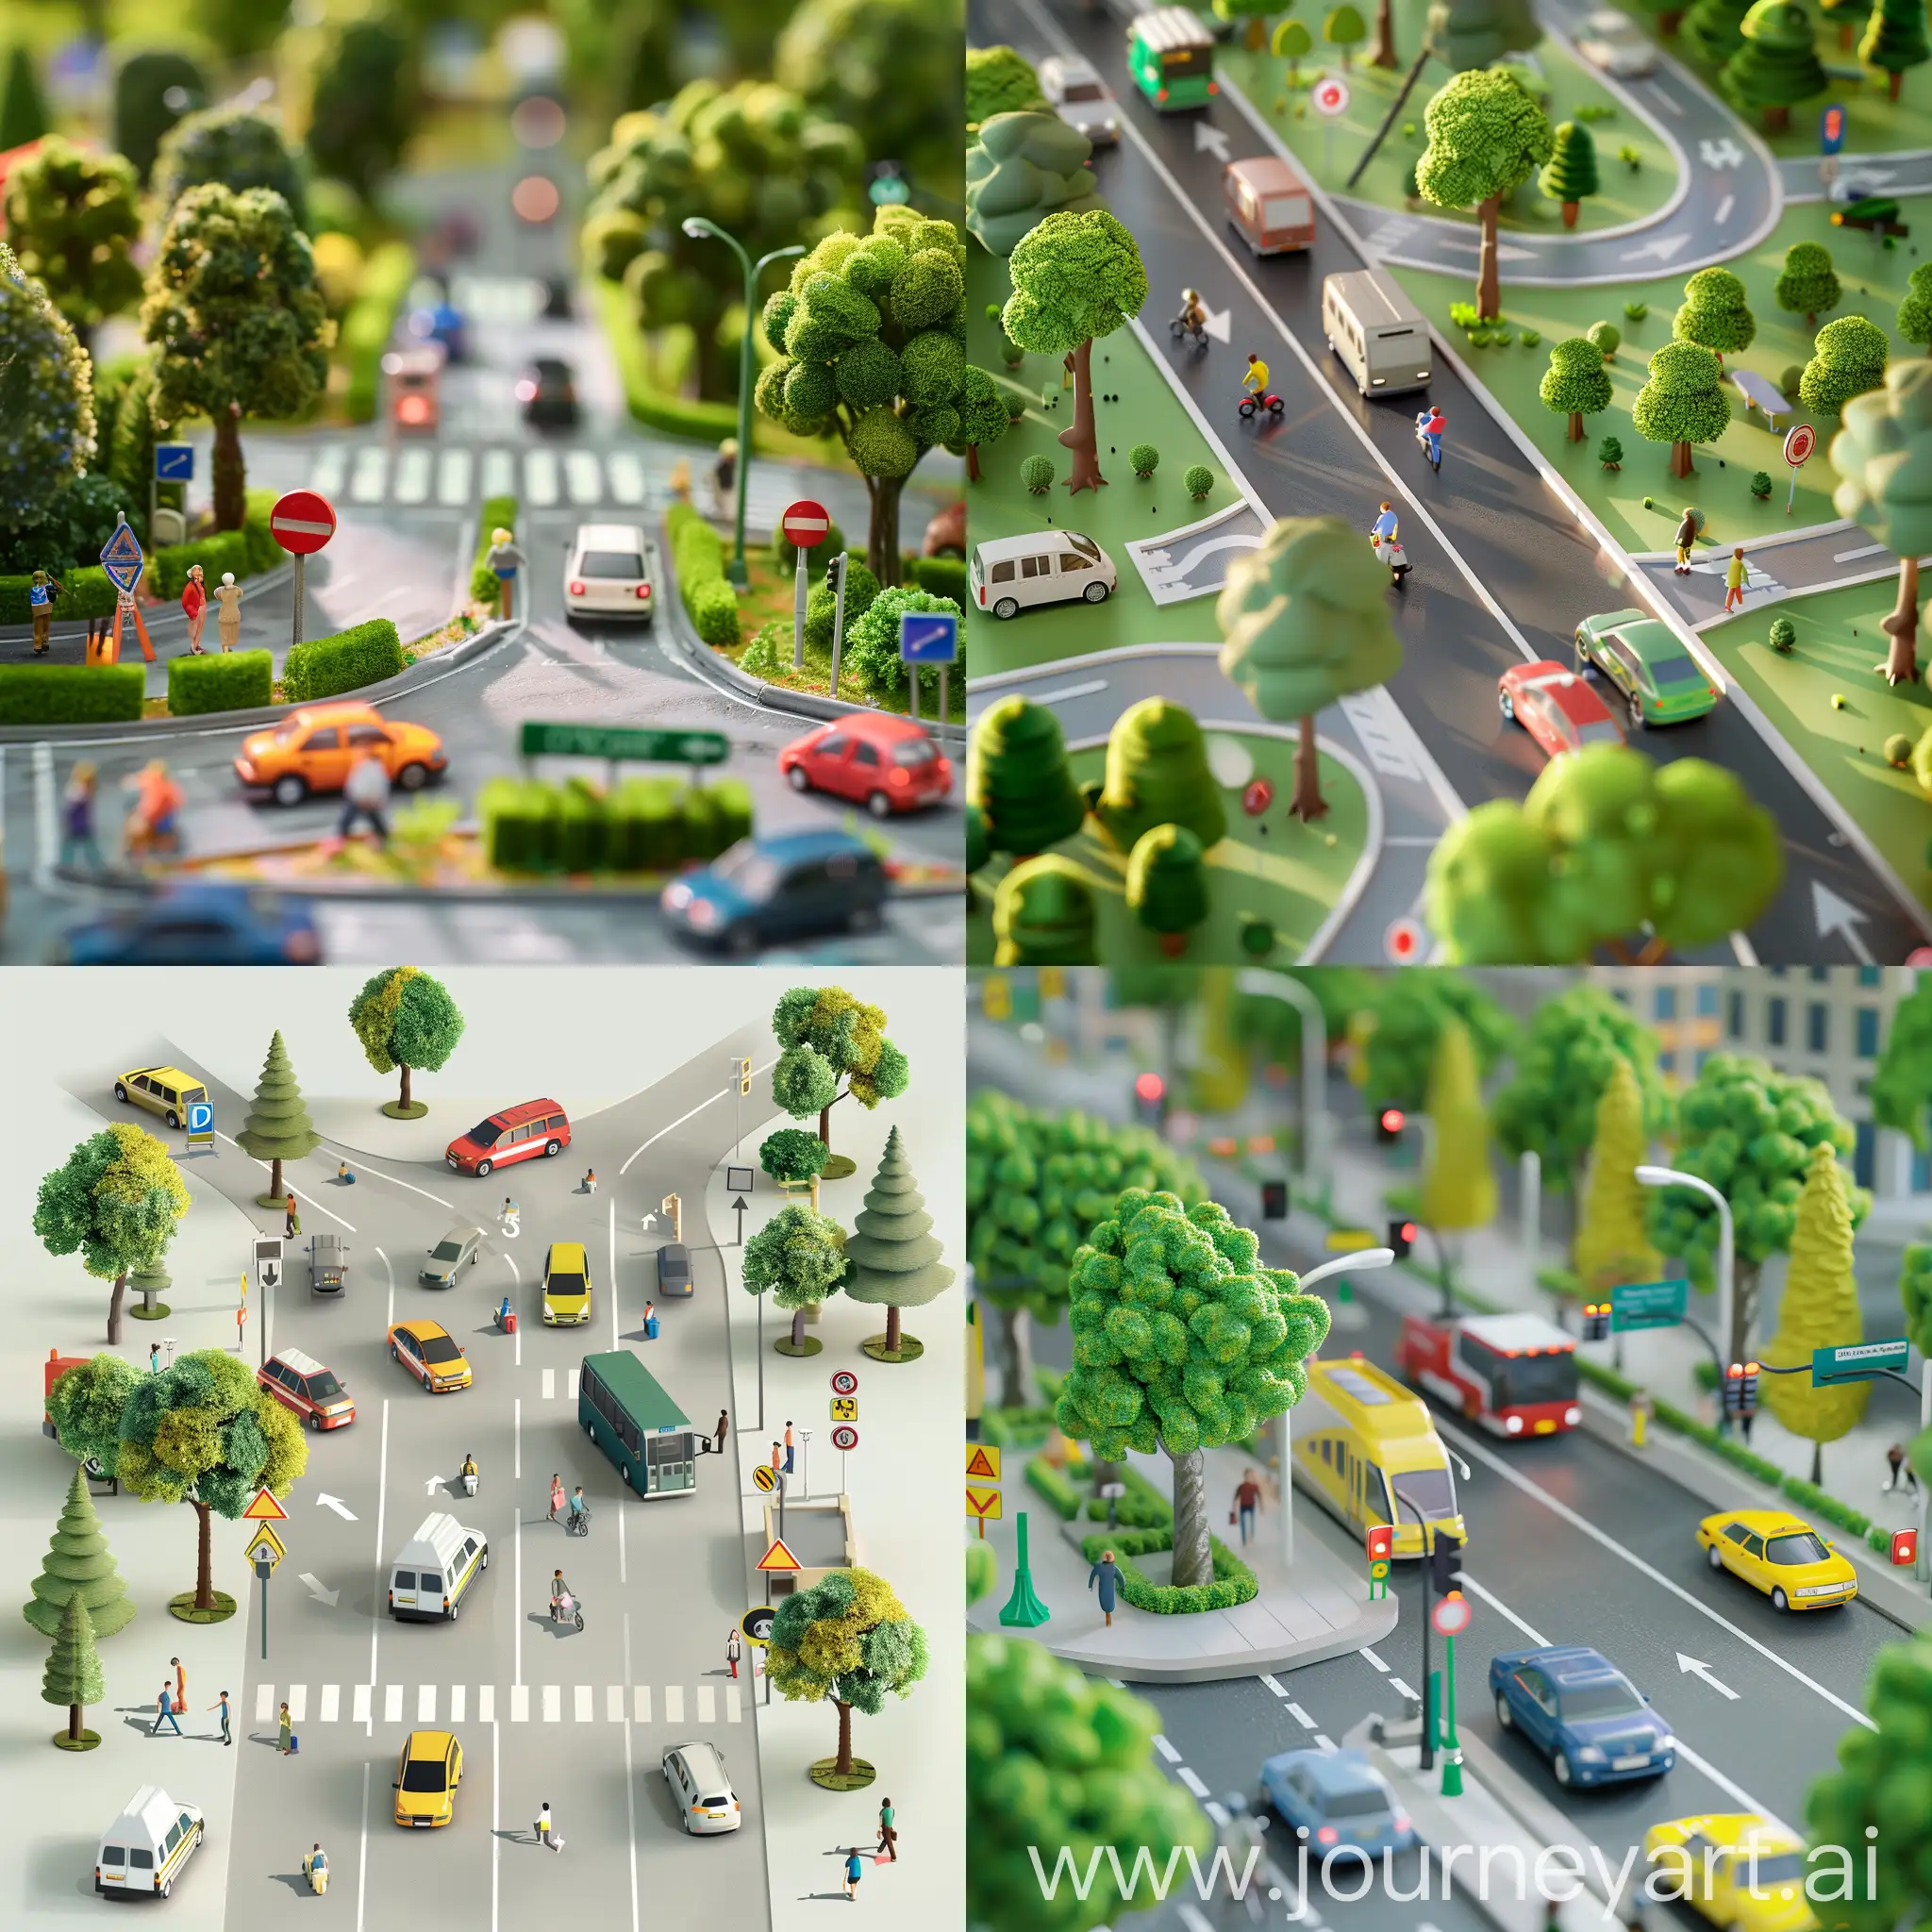 Vibrant-Urban-Life-Realistic-Scene-of-Road-Vehicles-Trees-People-and-Traffic-Signs